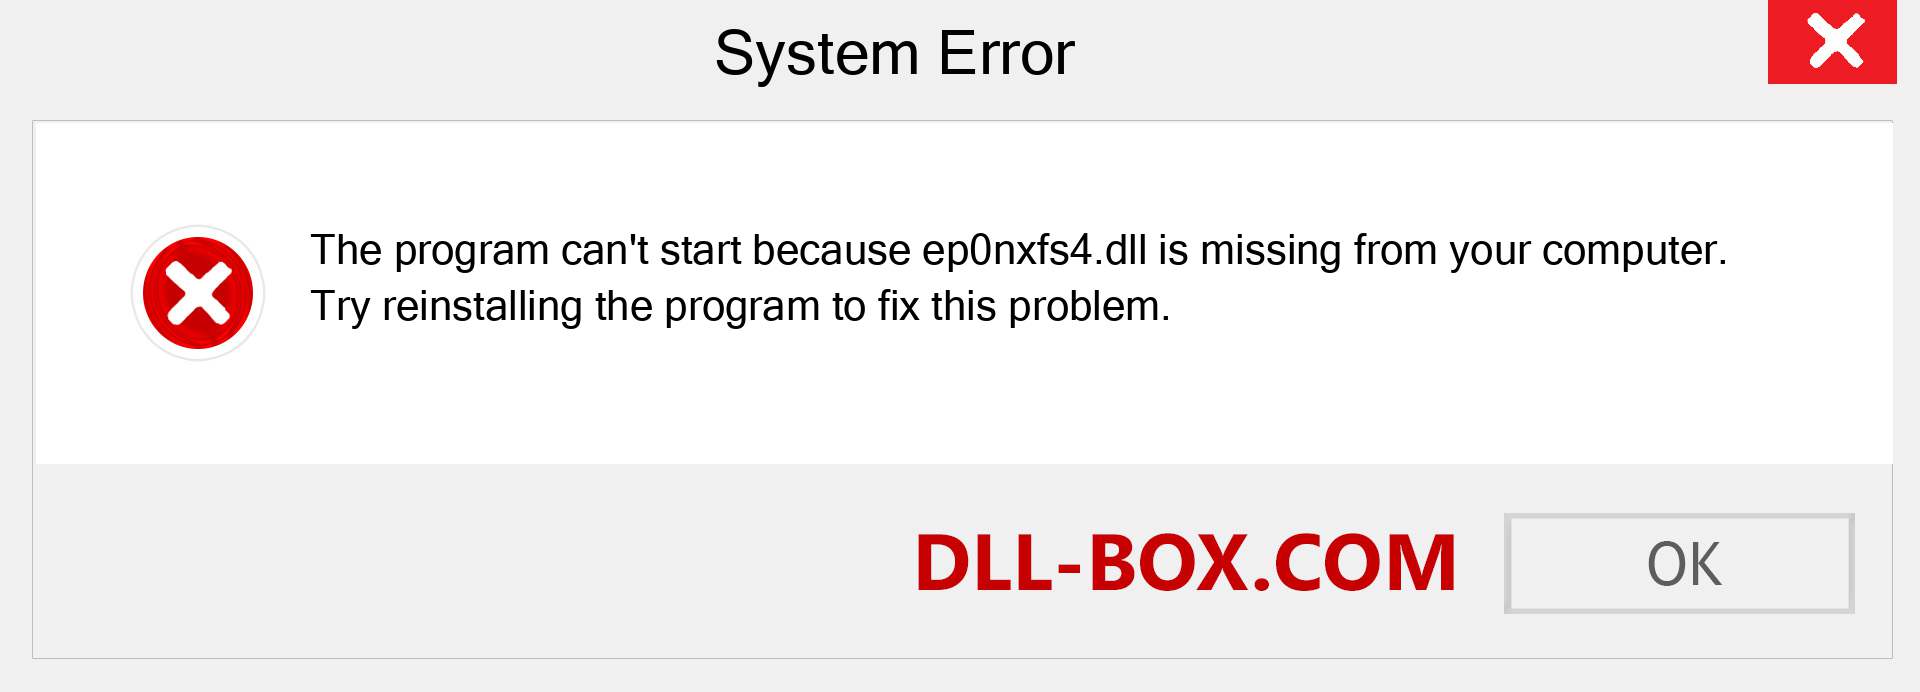  ep0nxfs4.dll file is missing?. Download for Windows 7, 8, 10 - Fix  ep0nxfs4 dll Missing Error on Windows, photos, images